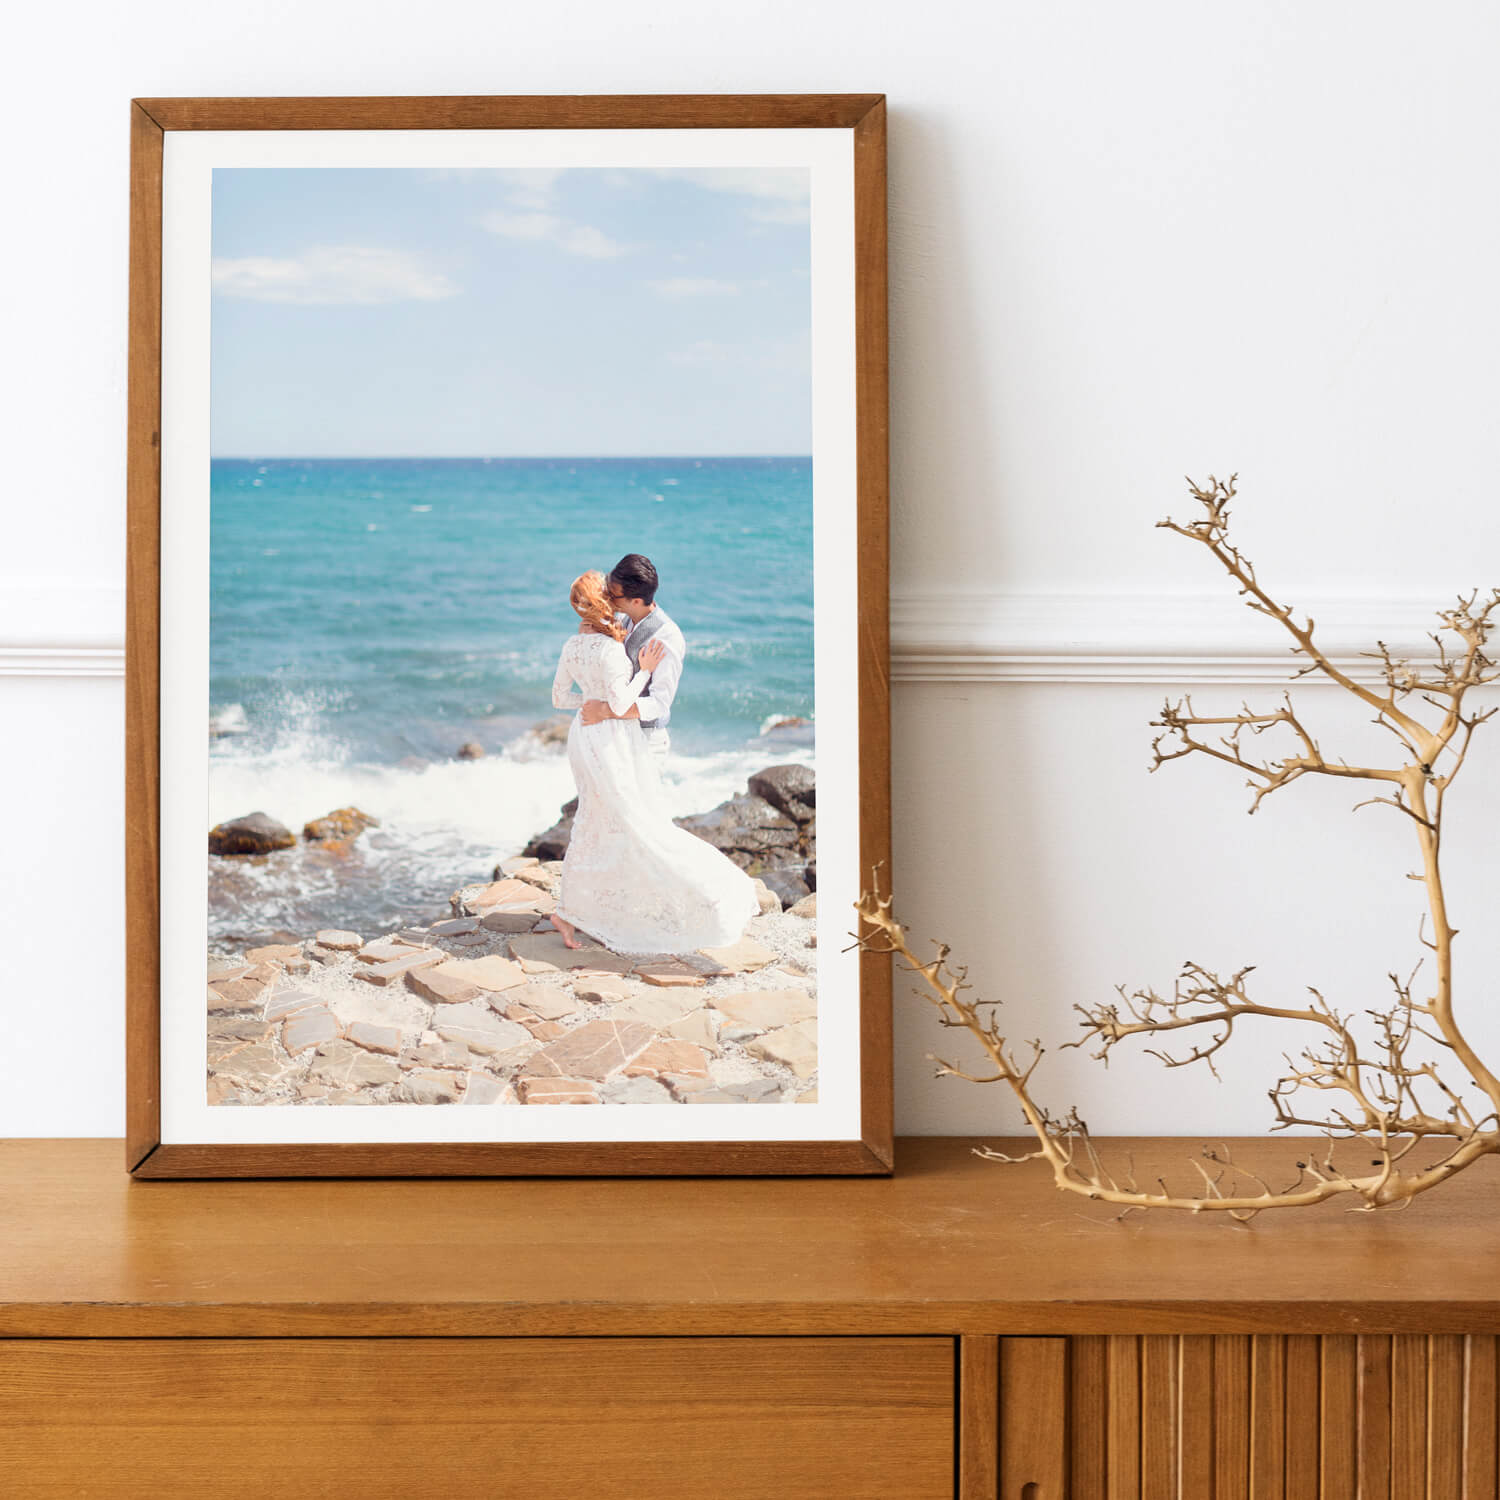 Wall art of a wedding captured in Cinque Terre, Italy